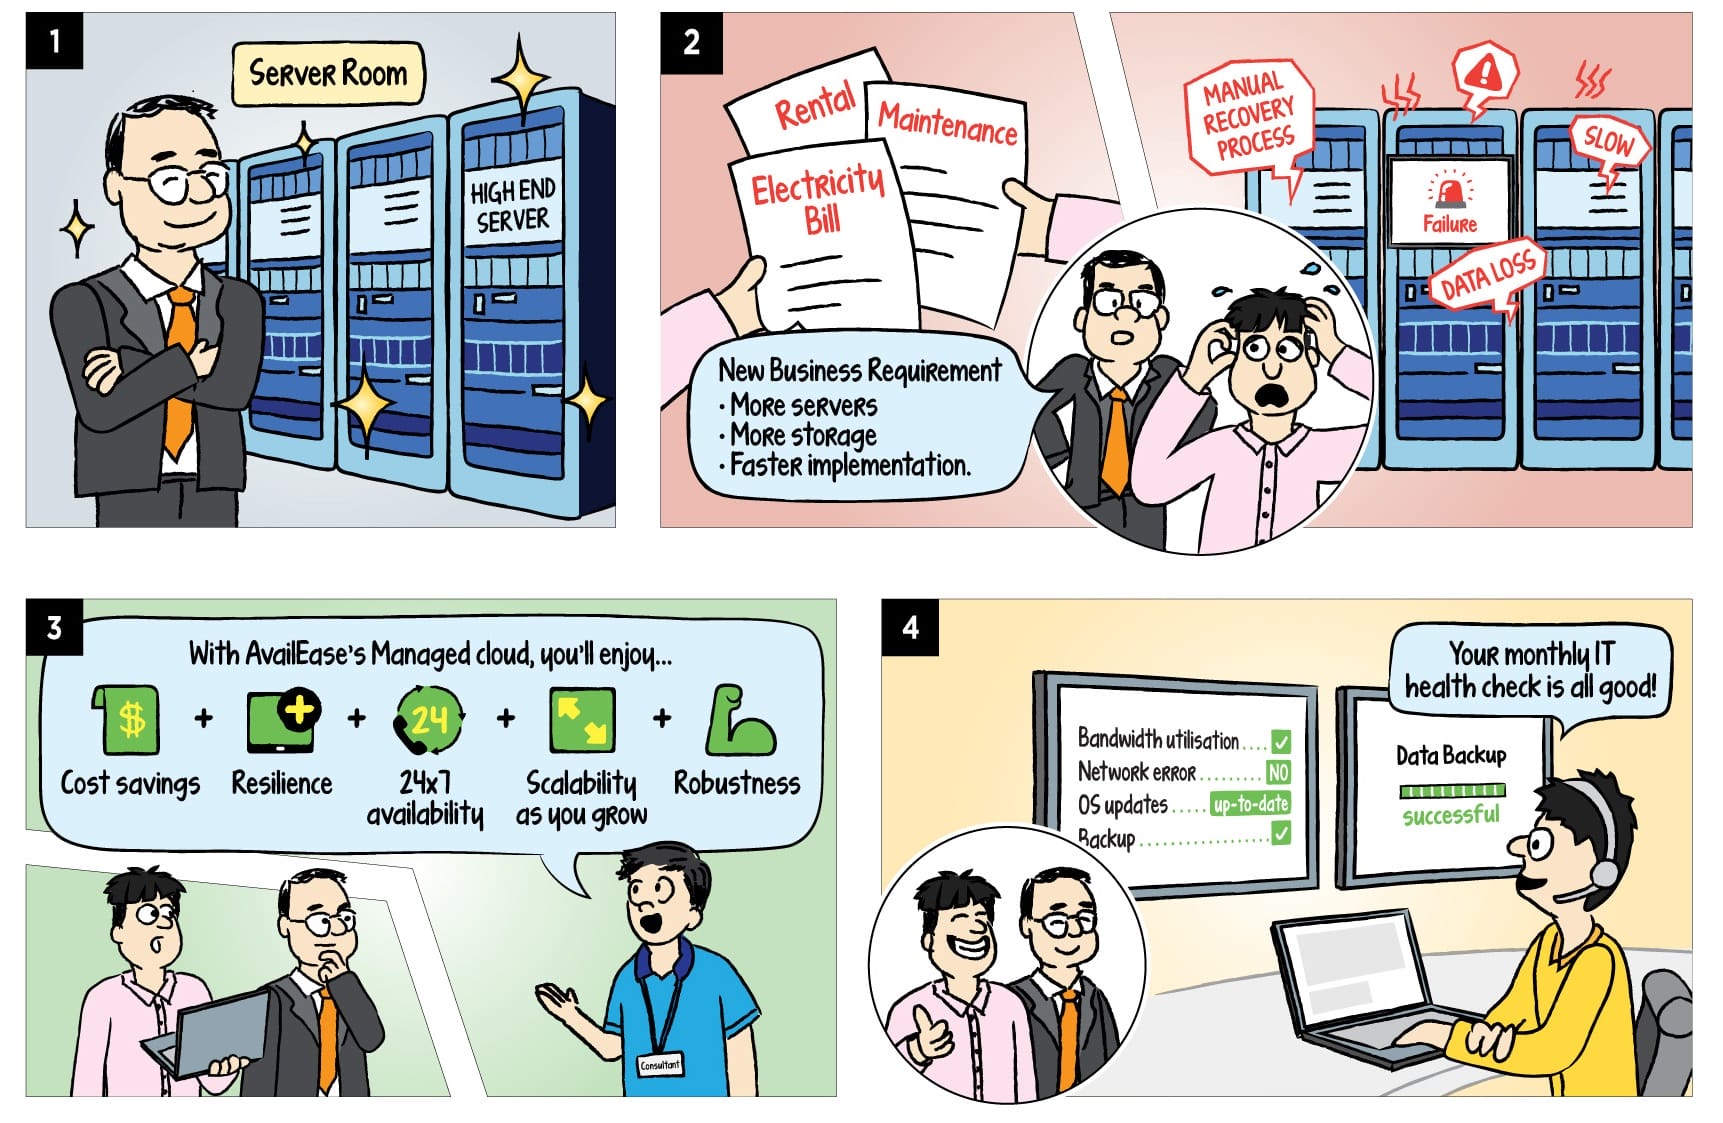 Comic strip illustrating the expensive cost of in house server and how Managed Cloud Services can address the problem